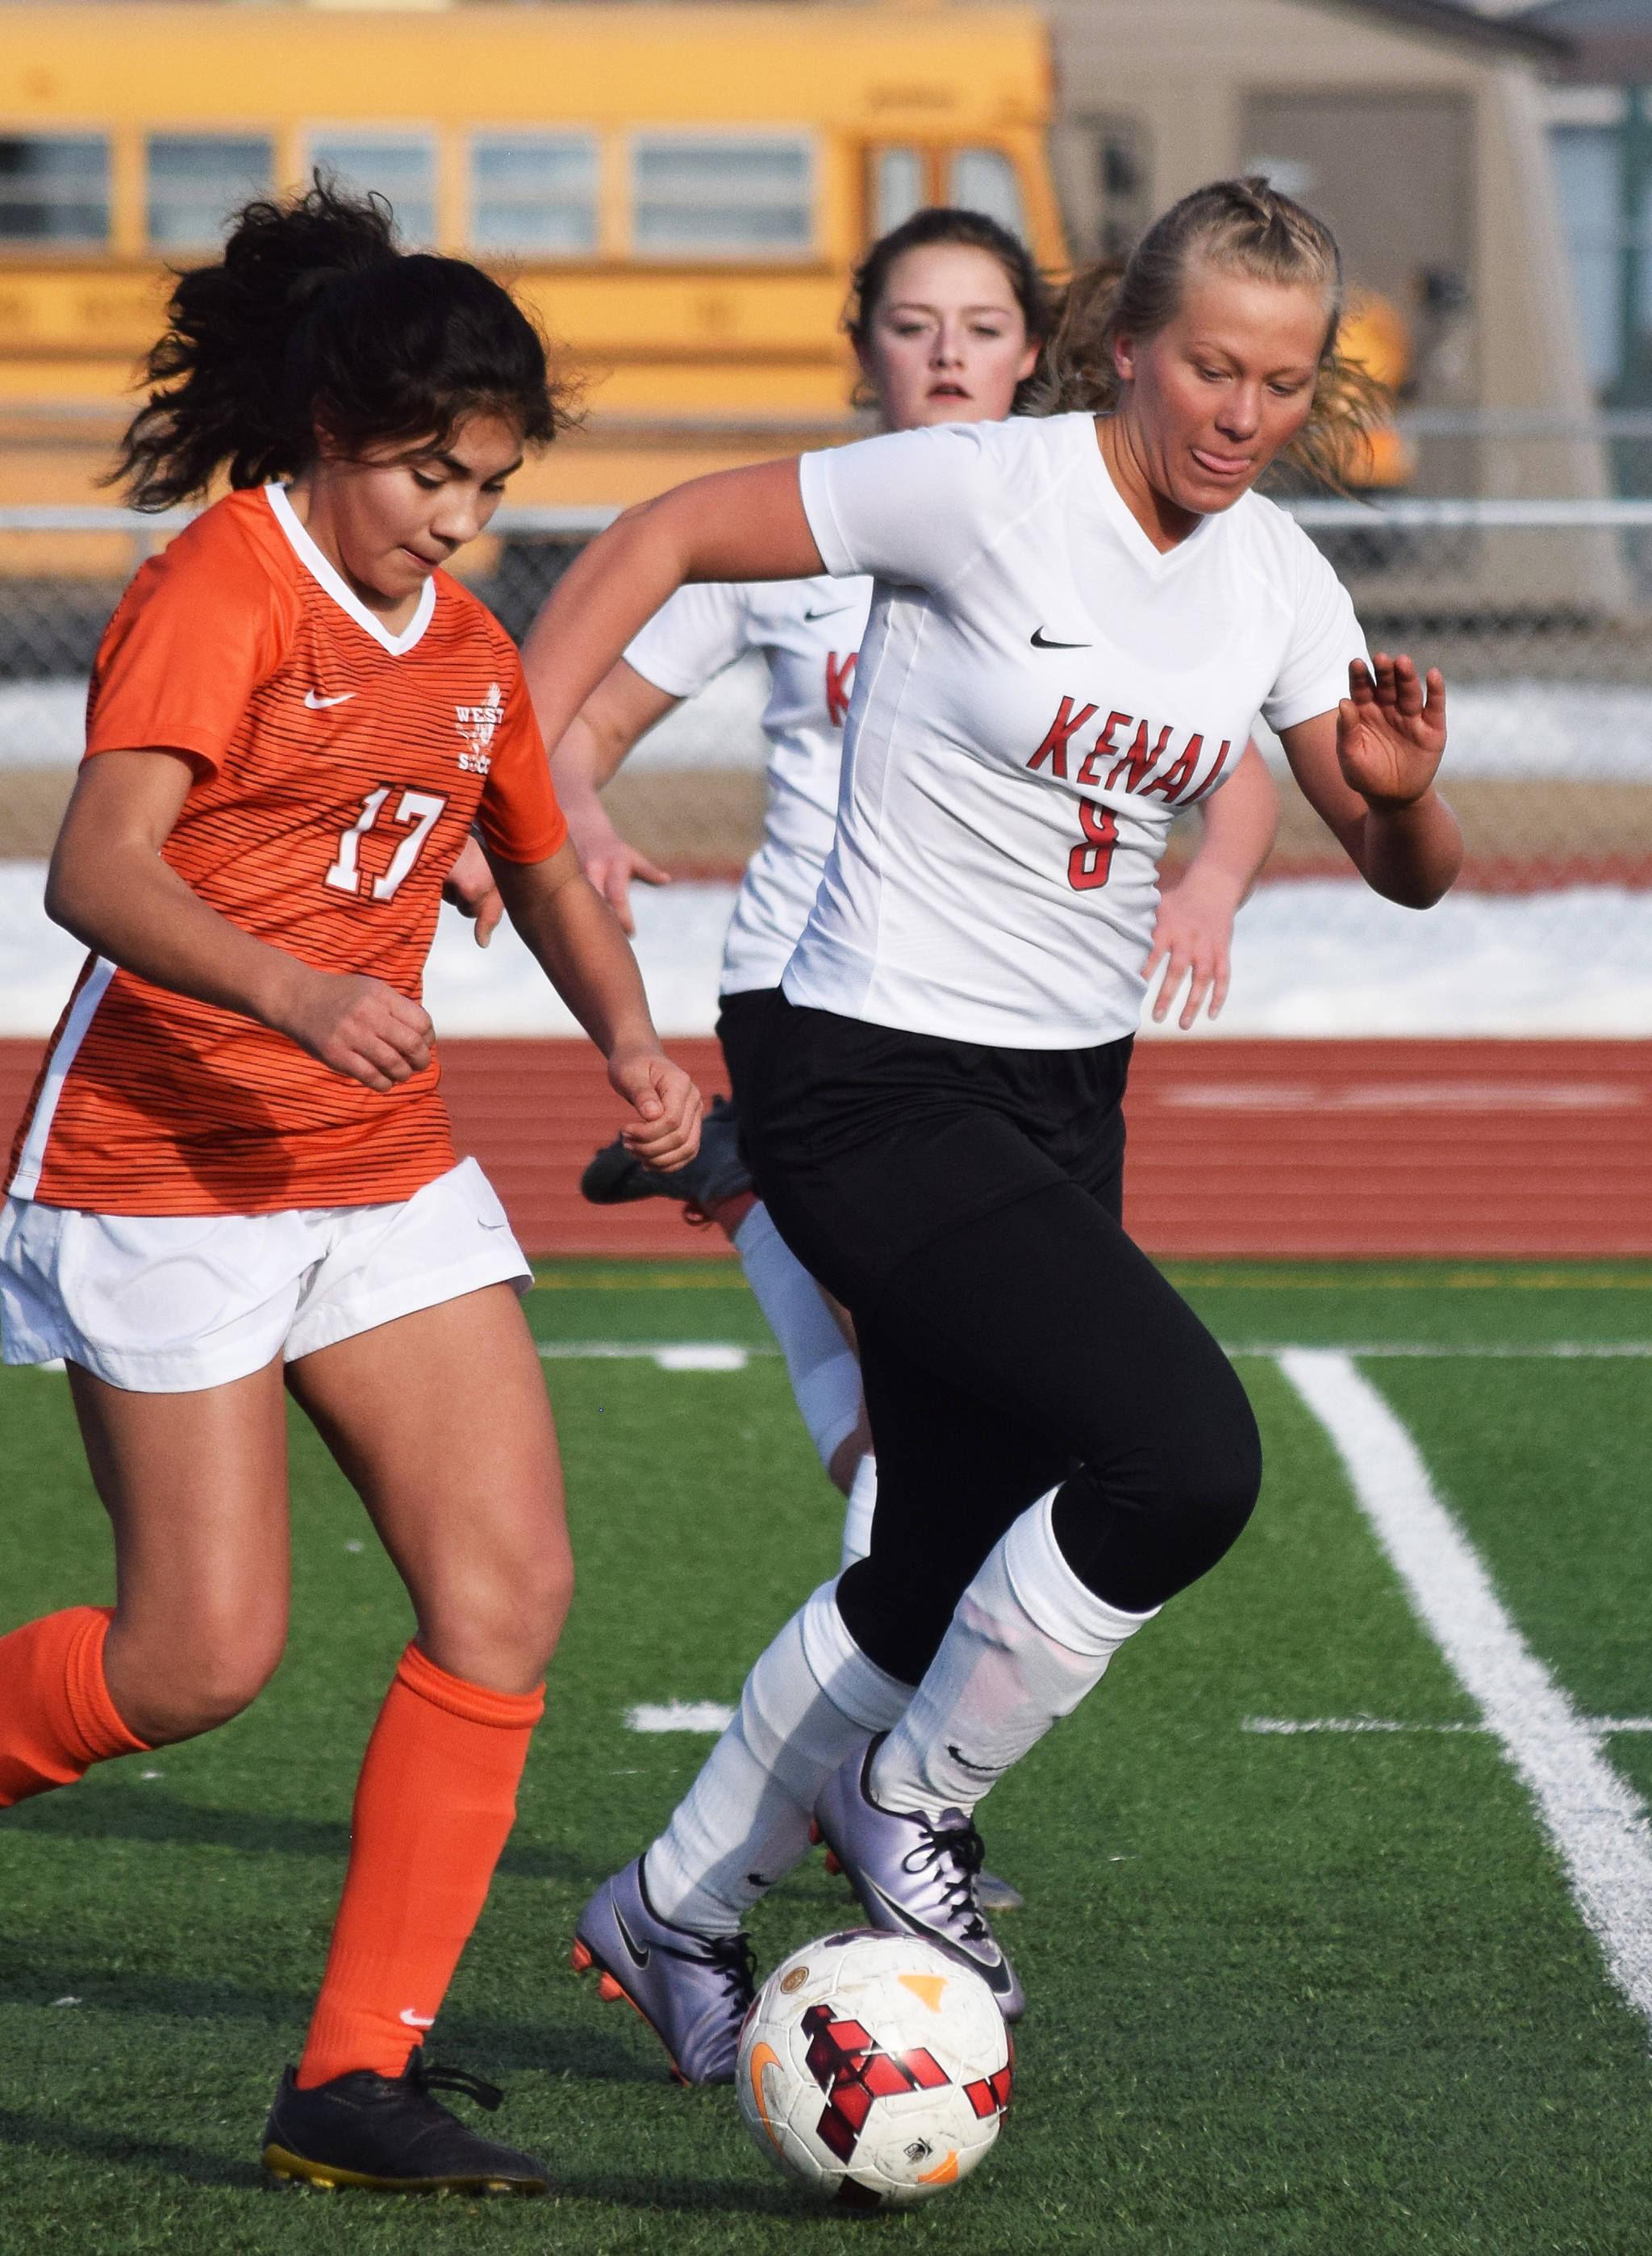 Kenai’s Anya Danielson (right) battles for possession with West’s Xaofeil Metcalf Thursday, April 4, 2019, in a nonconference game at Kenai Central High School. (Photo by Joey Klecka/Peninsula Clarion)